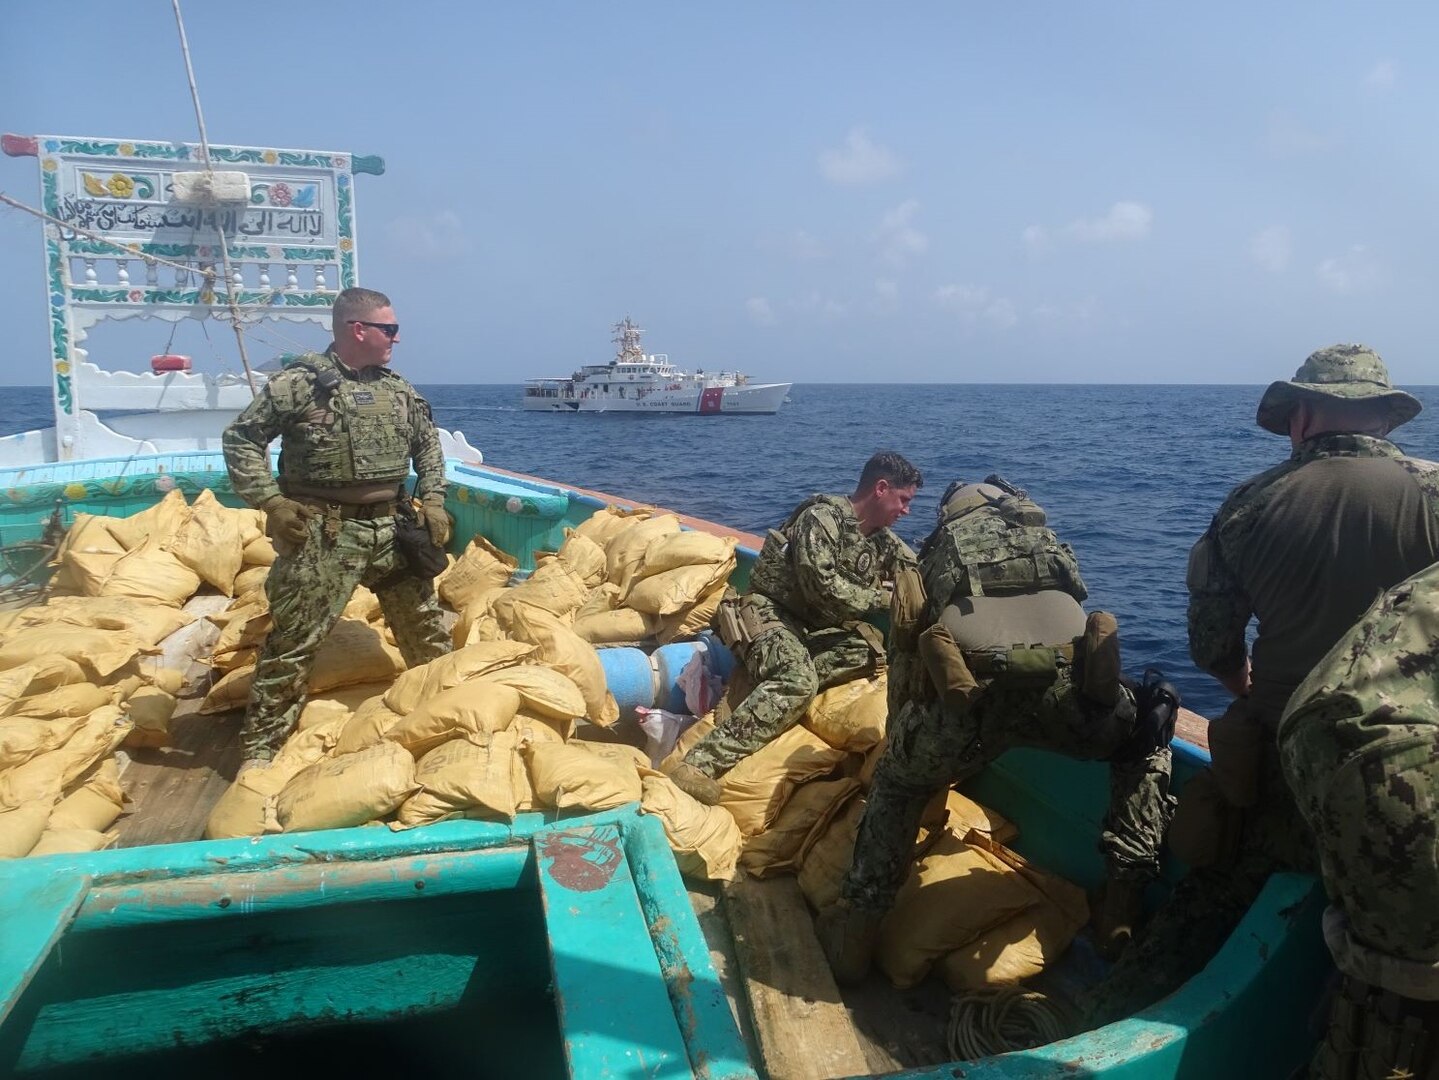 GULF OF OMAN (Sept. 27, 2022) A U.S. Coast Guard interdiction team seizes bags of illegal narcotics from a fishing vessel interdicted by fast response cutter USCGC Charles Moulthrope (WPC 1141) in the Gulf of Oman, Sept. 27.